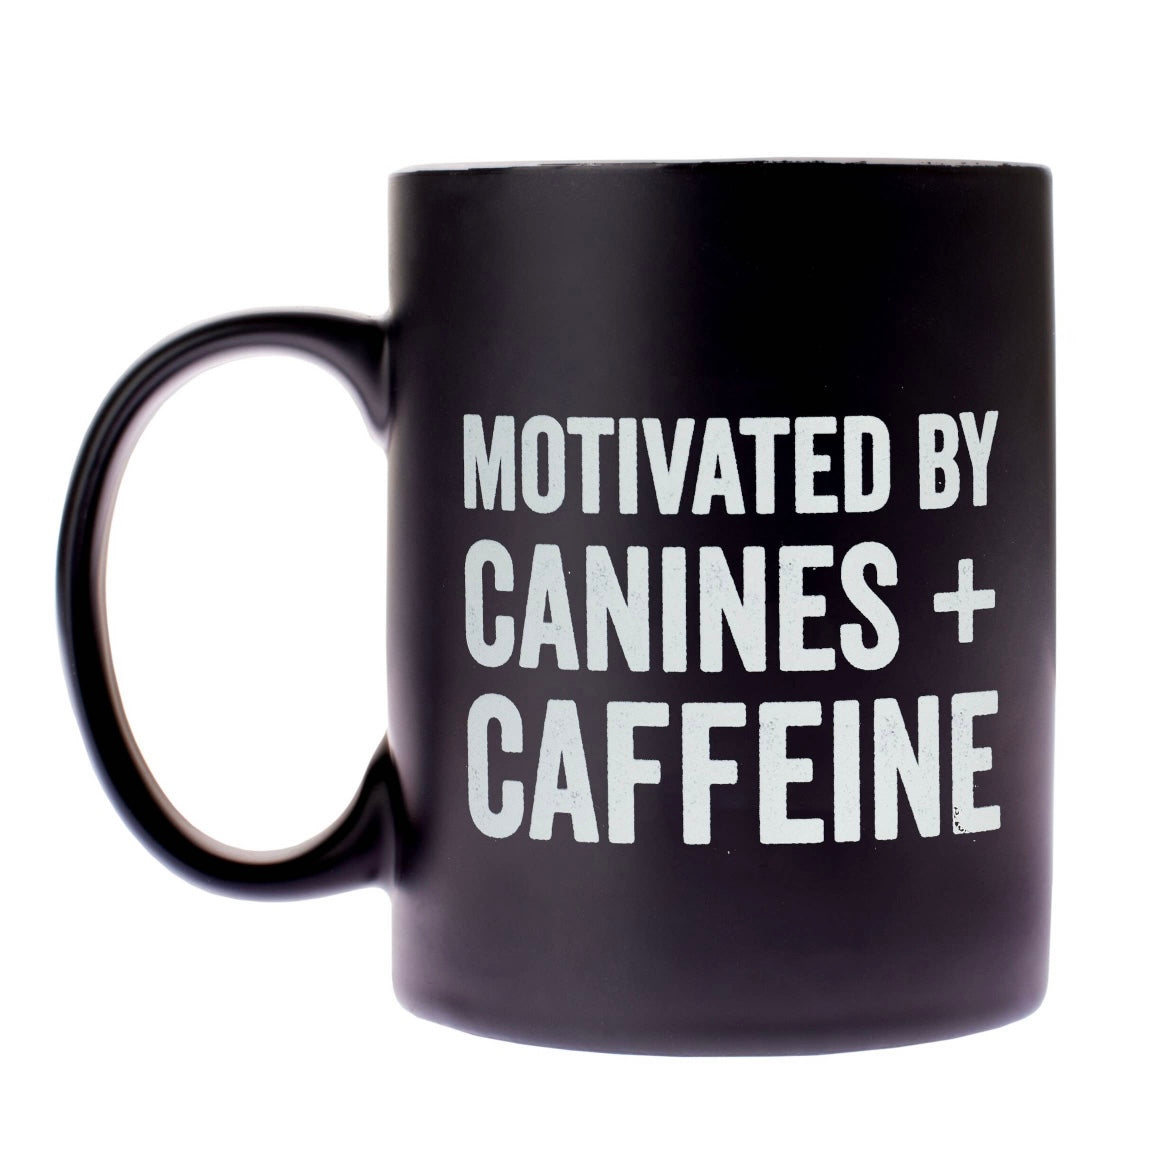 Motivated By Canines + Caffeine